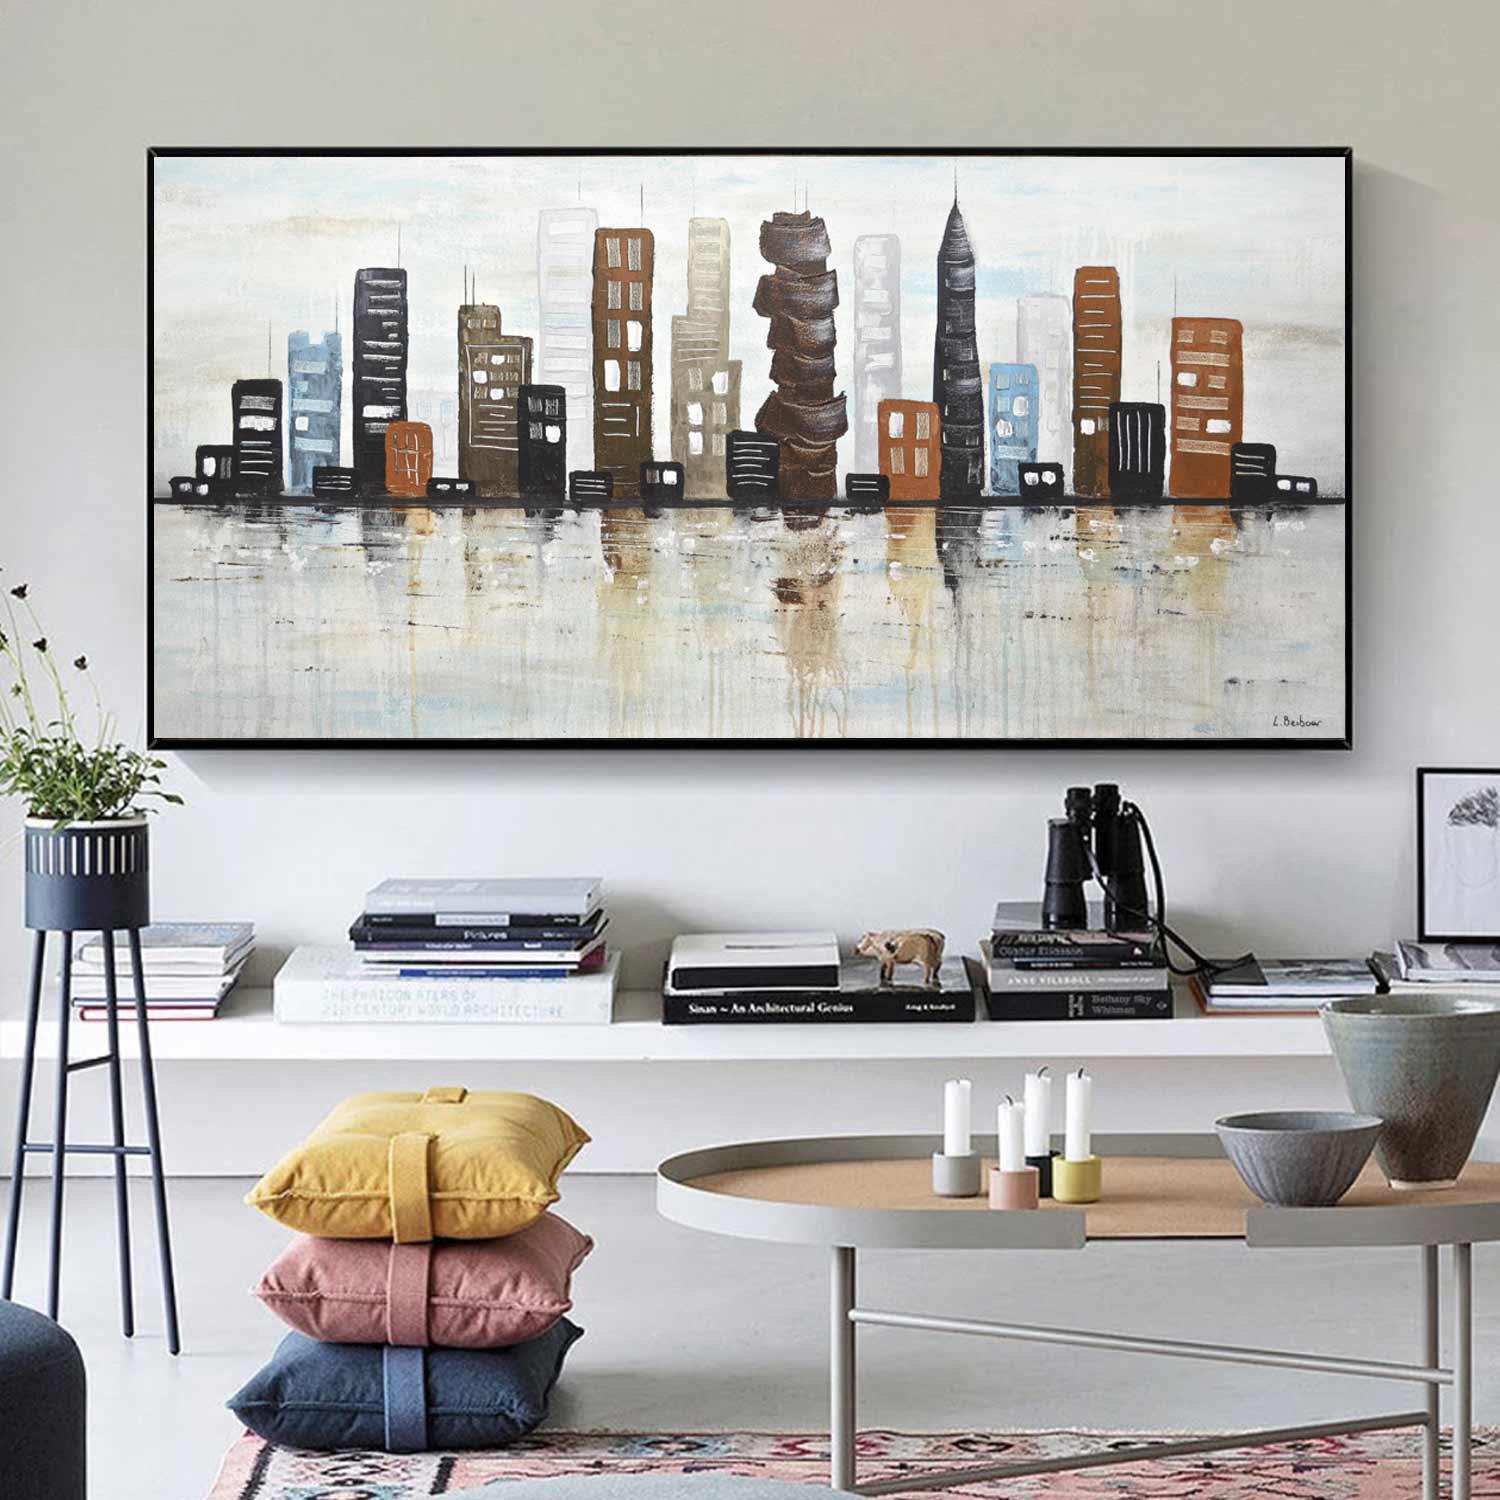 Skyline Painting Abstract City Buildings "City of Dreams"